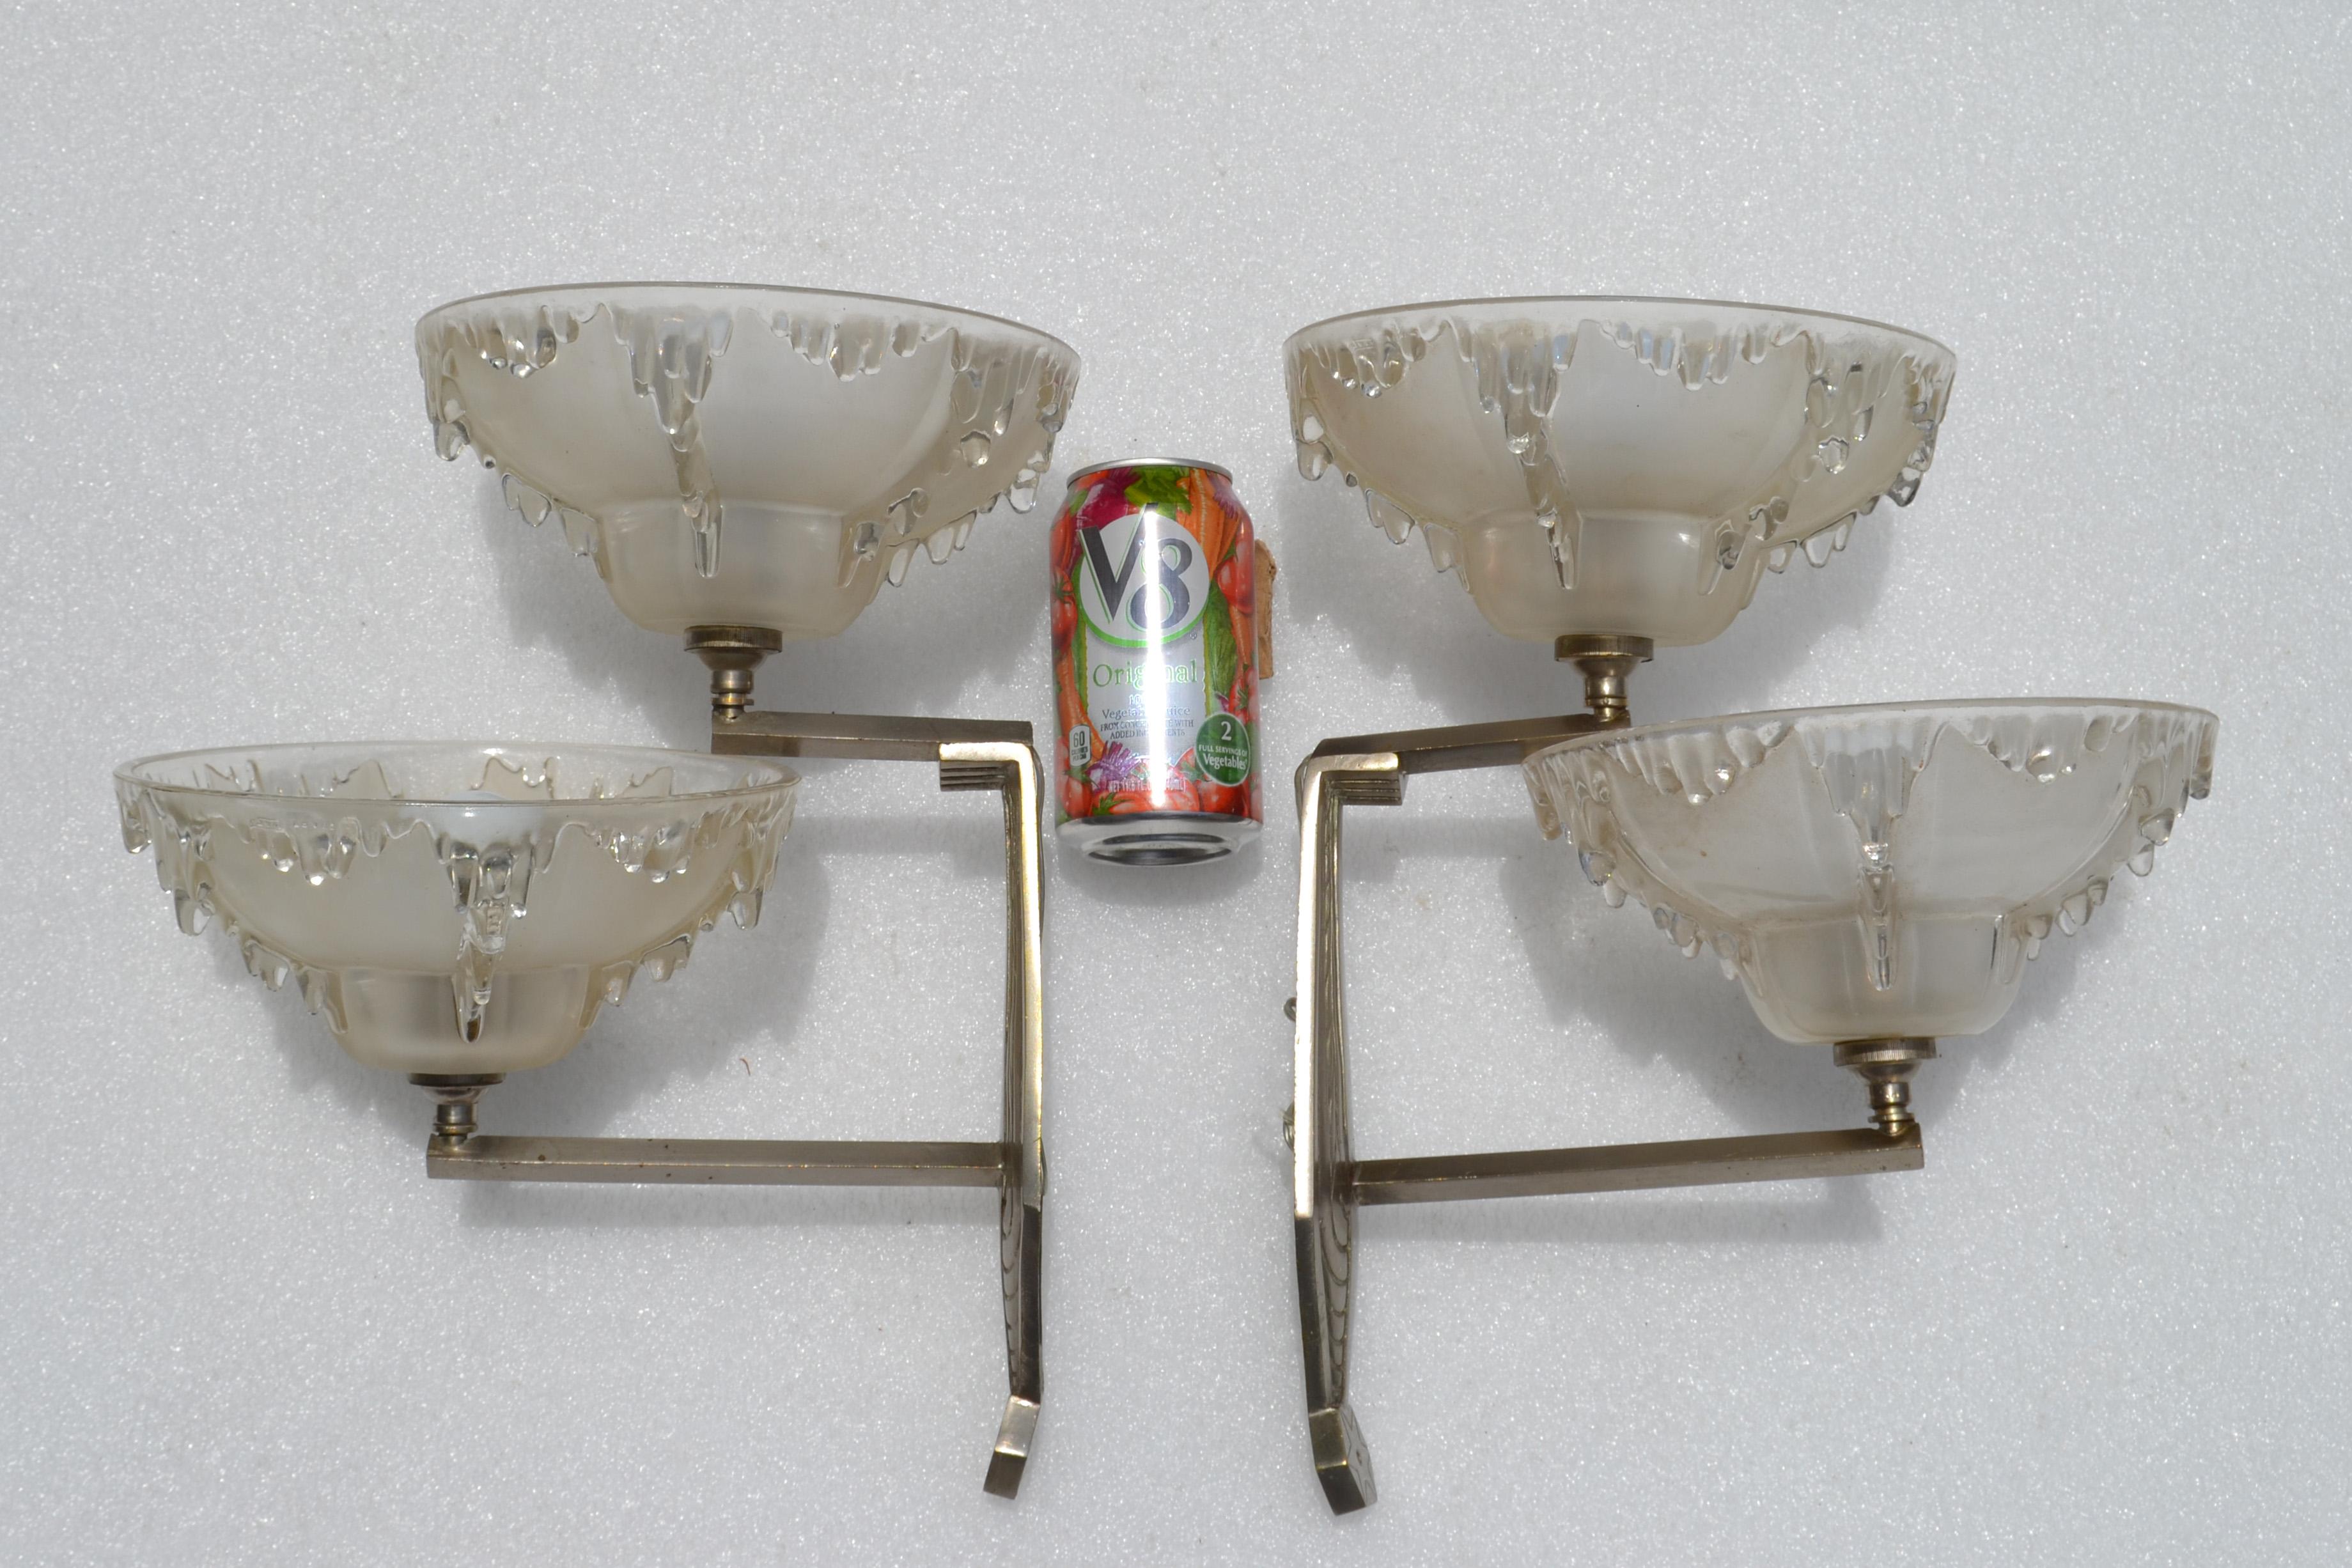 Art Deco Blown Murano Glass & Steel Wall Sconces France Mid-Century Modern, Pair For Sale 8